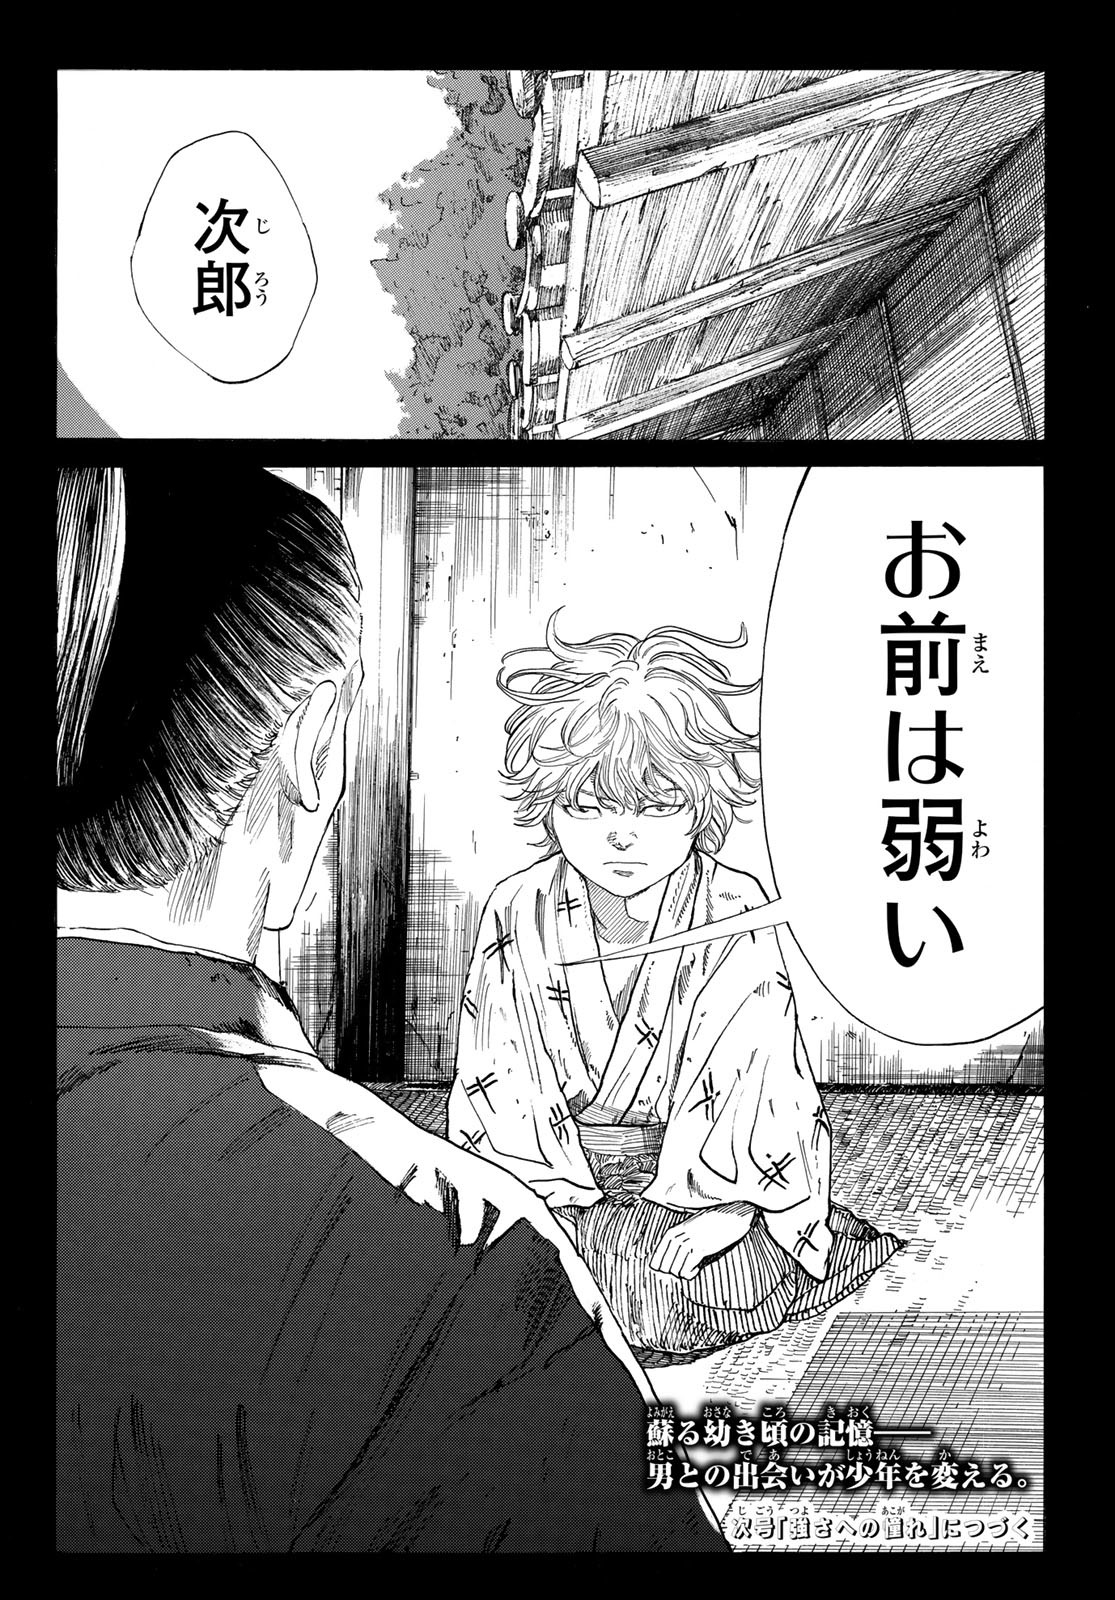 An Mo Miburo 第56話 - Page 20